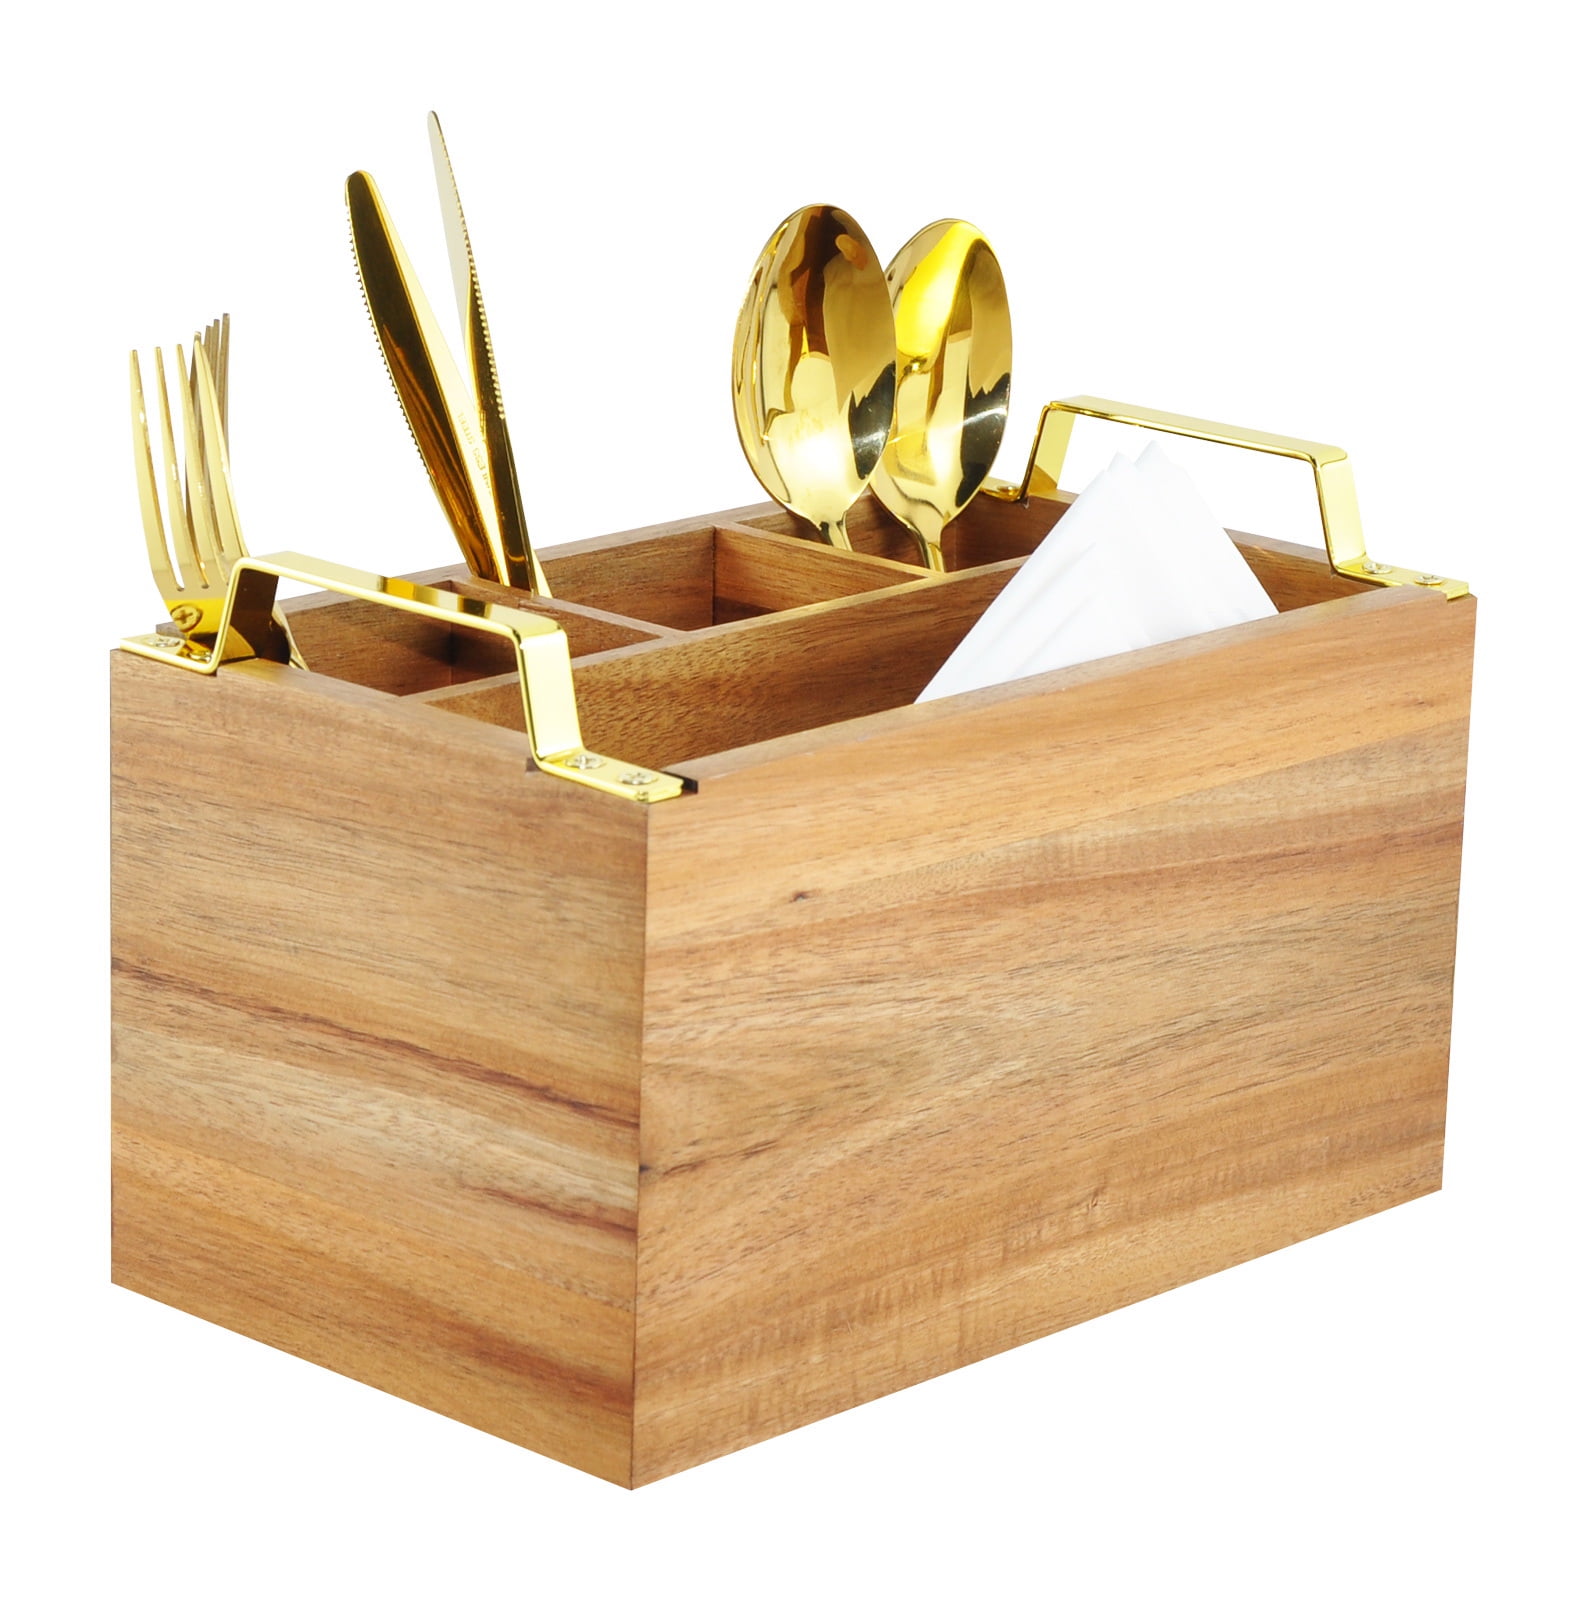 Woodluv 4 Compartments Drop-Down Handle Bamboo Kitchen Cutlery Caddy Utensil Rack Holder Organizer Divider 